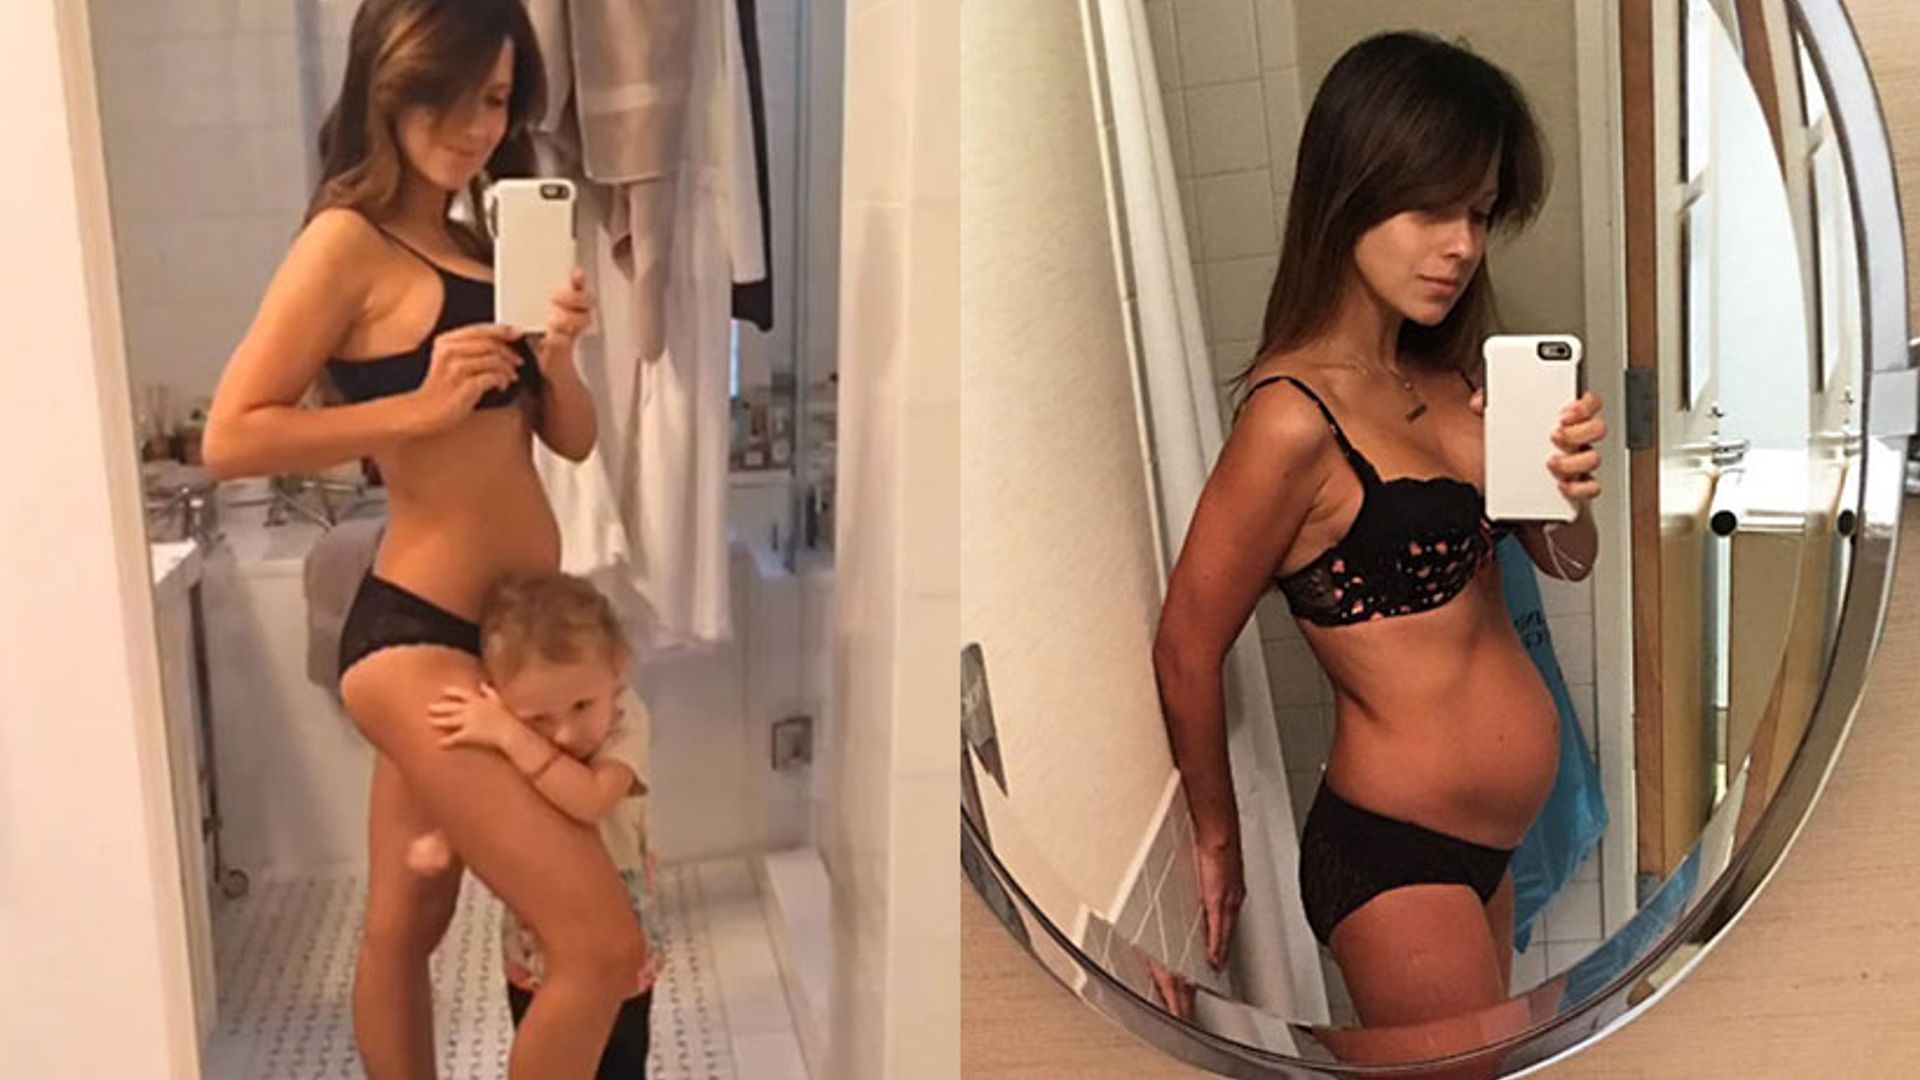 Hilaria Baldwin shares inspiring message about body image as she shows off post-pregnancy body